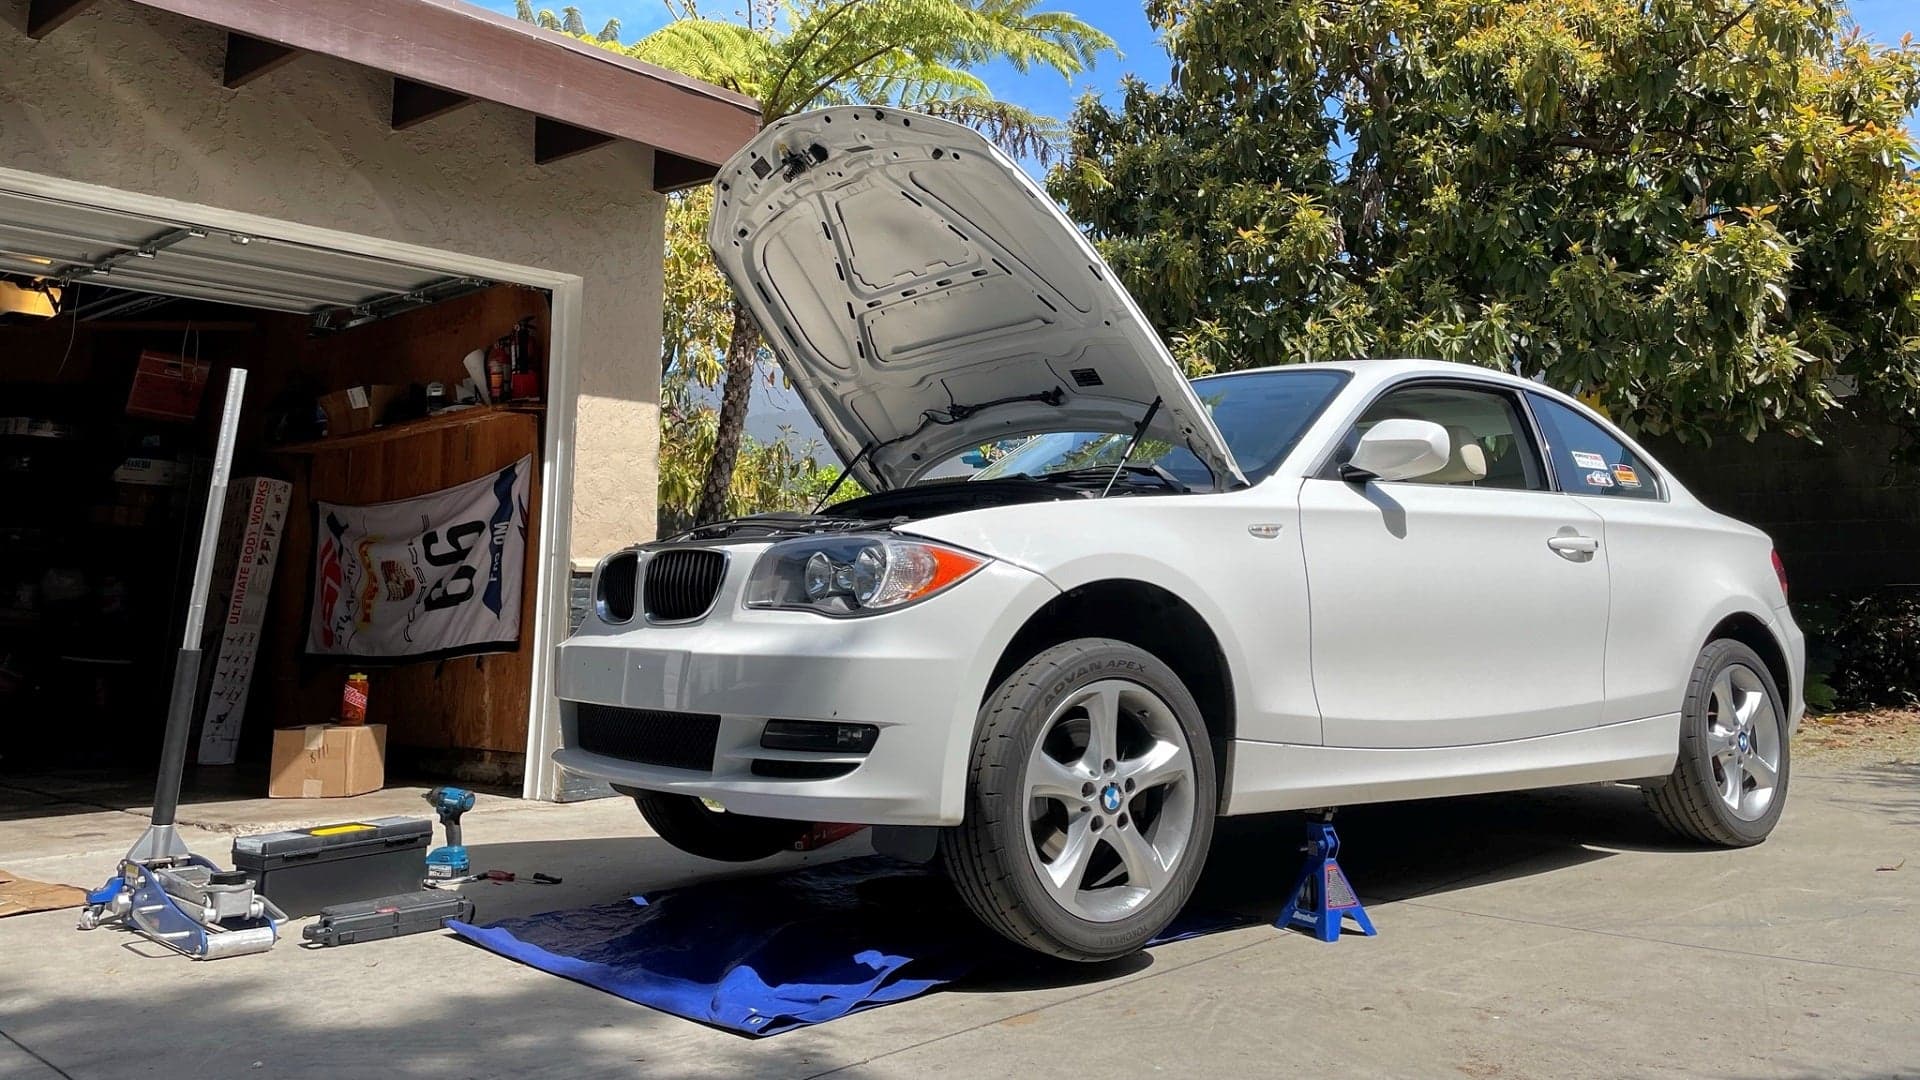 My First BMW 128i Wrenching Experience Went Strangely Well